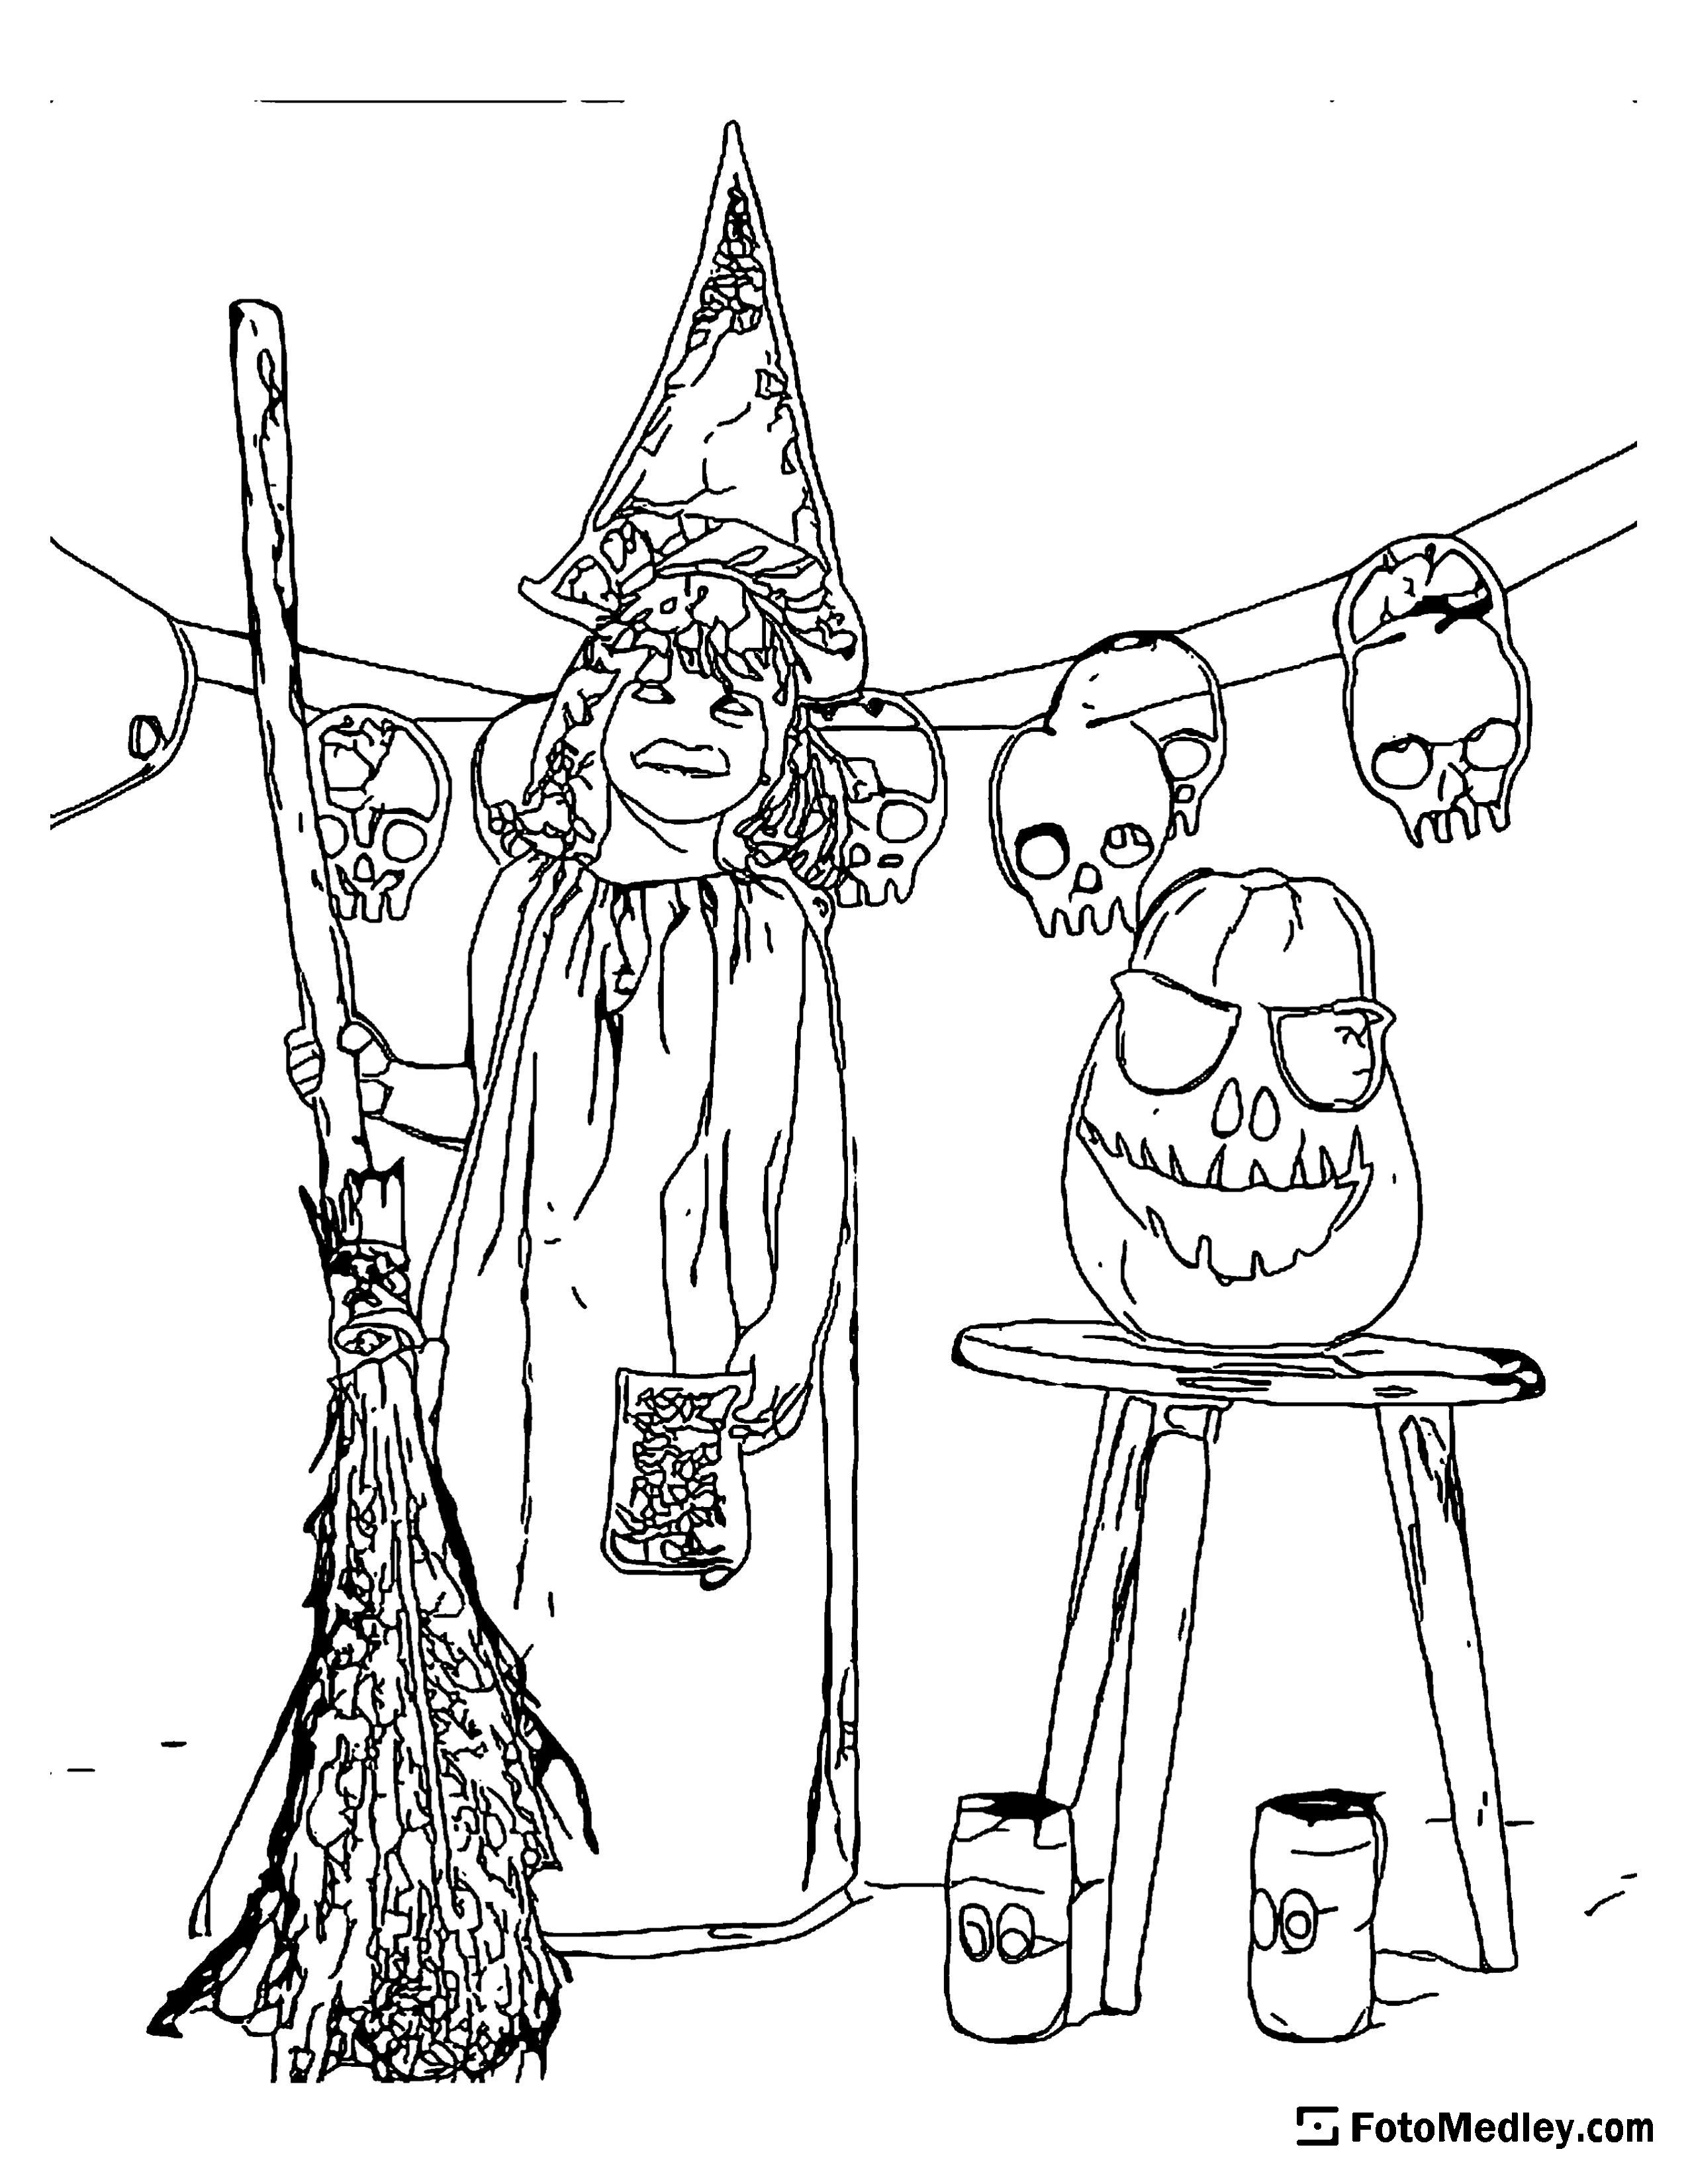 A coloring sheet of a girl dressed in a witch costume for Halloween, with broomstick and skulls around.